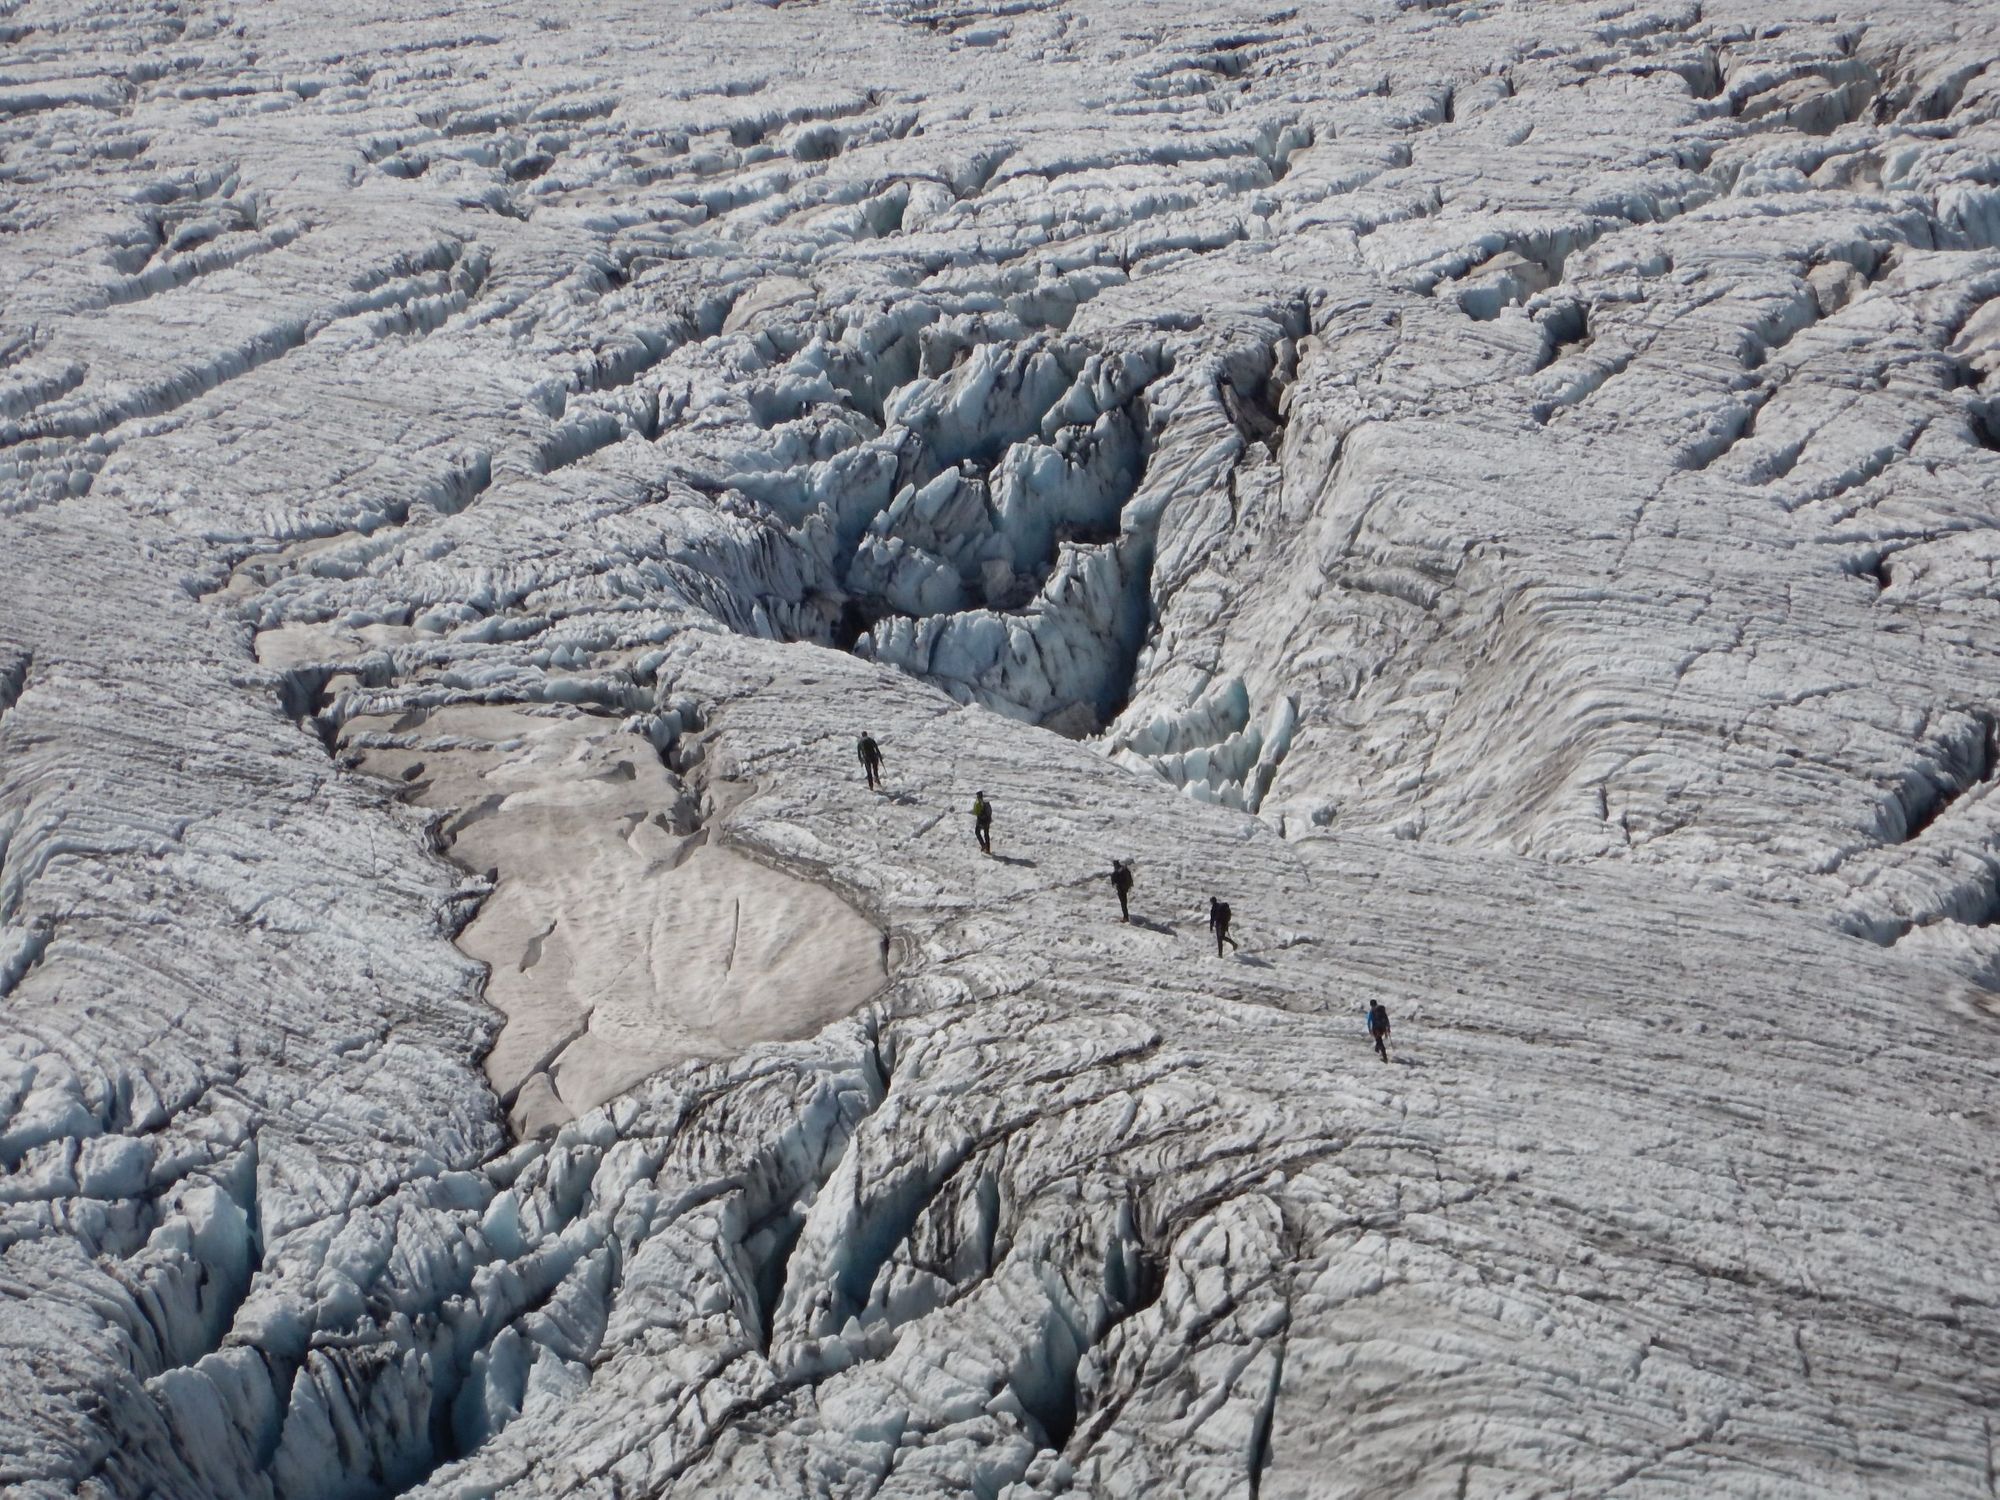 Climbers crossing a glacier on Mont Blanc mountain.